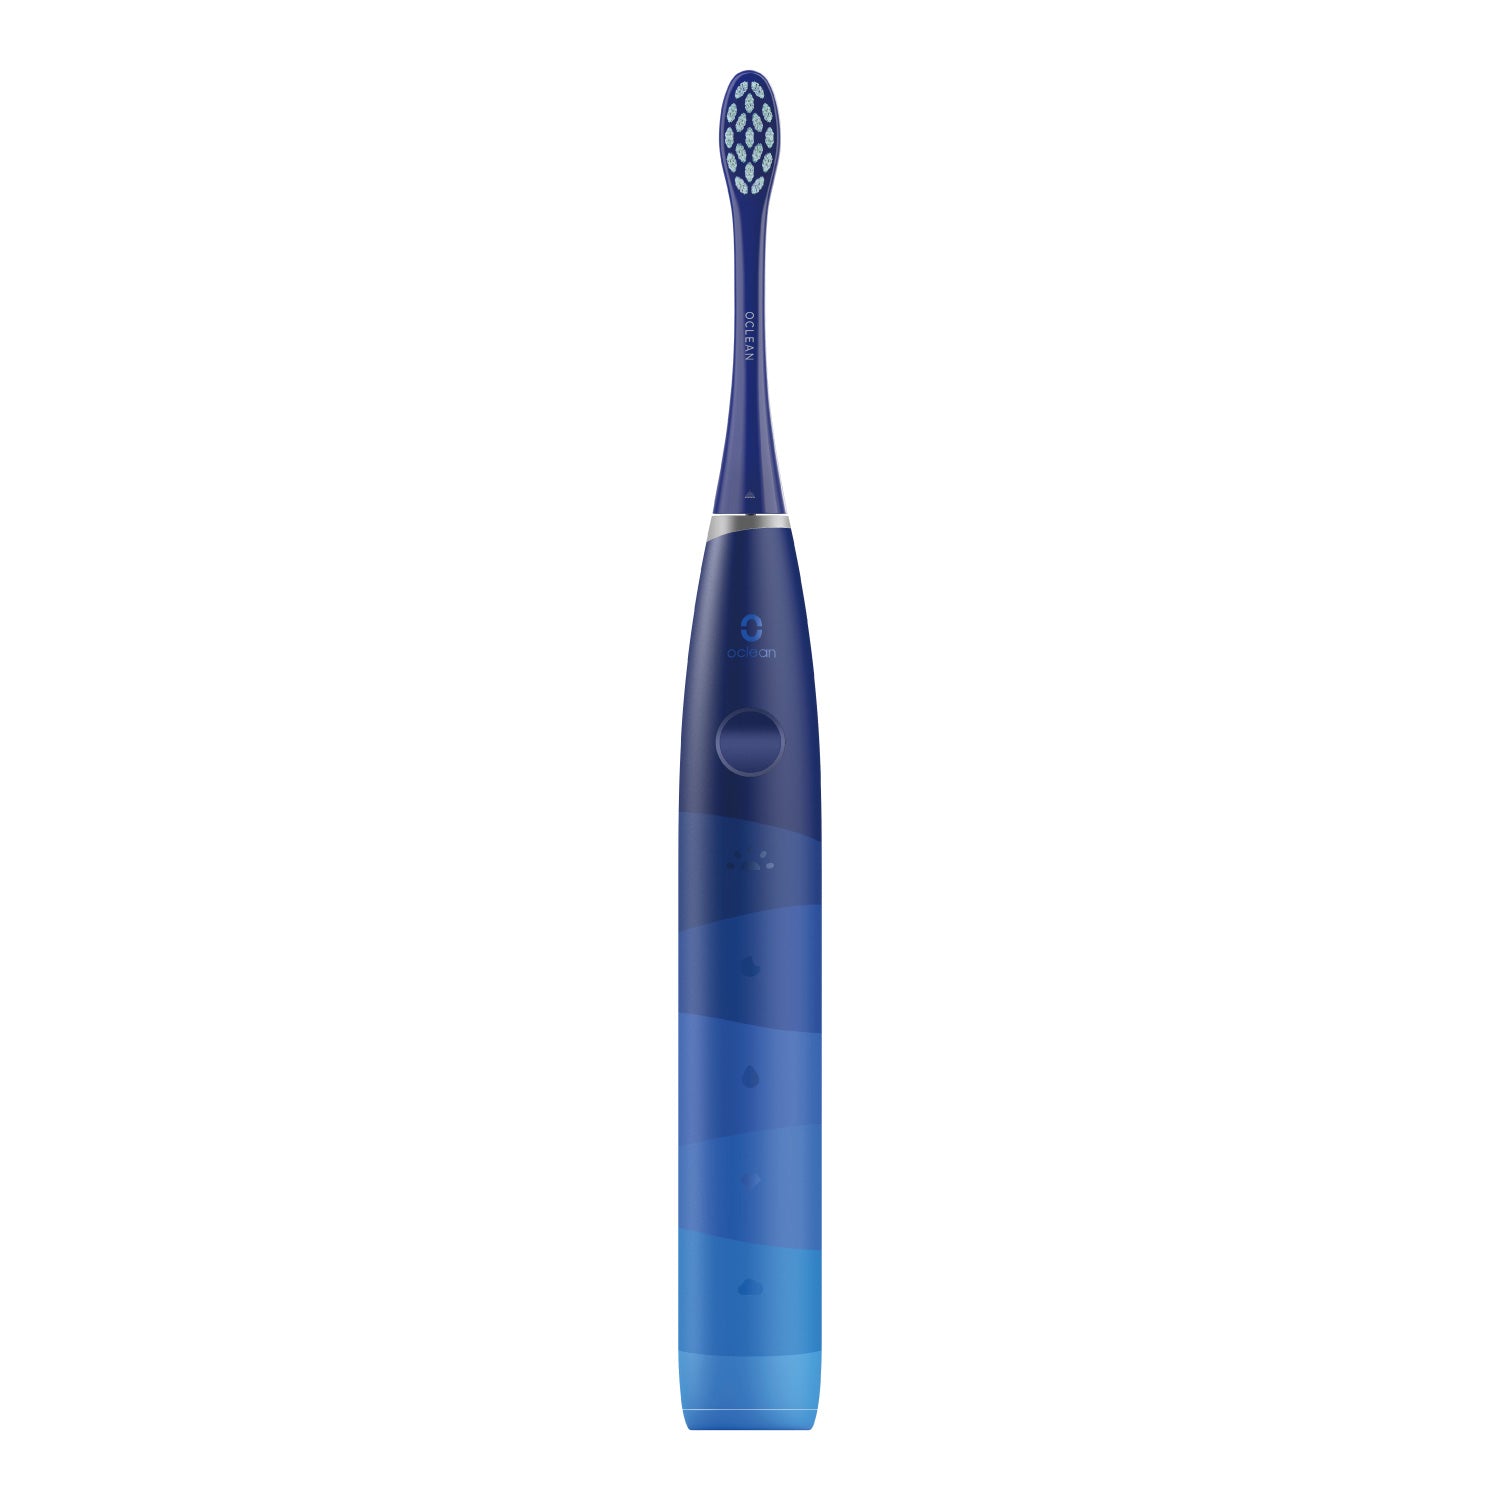 Oclean Flow Sonic Electric Toothbrush-Toothbrushes-Oclean US Store